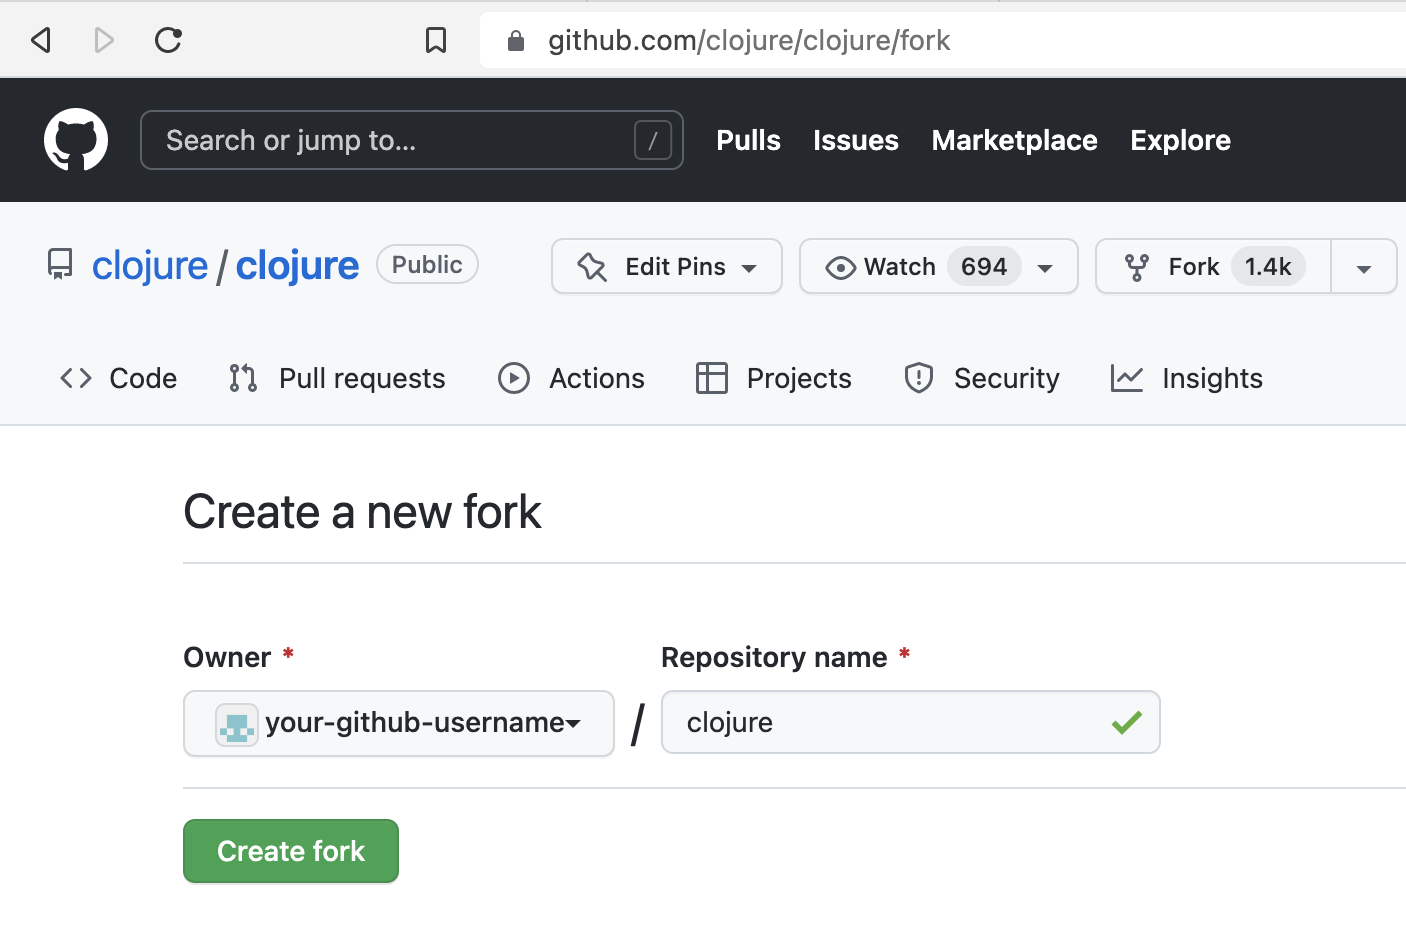 A prompt to create a fork of the Clojure repository in the your-github-username user.